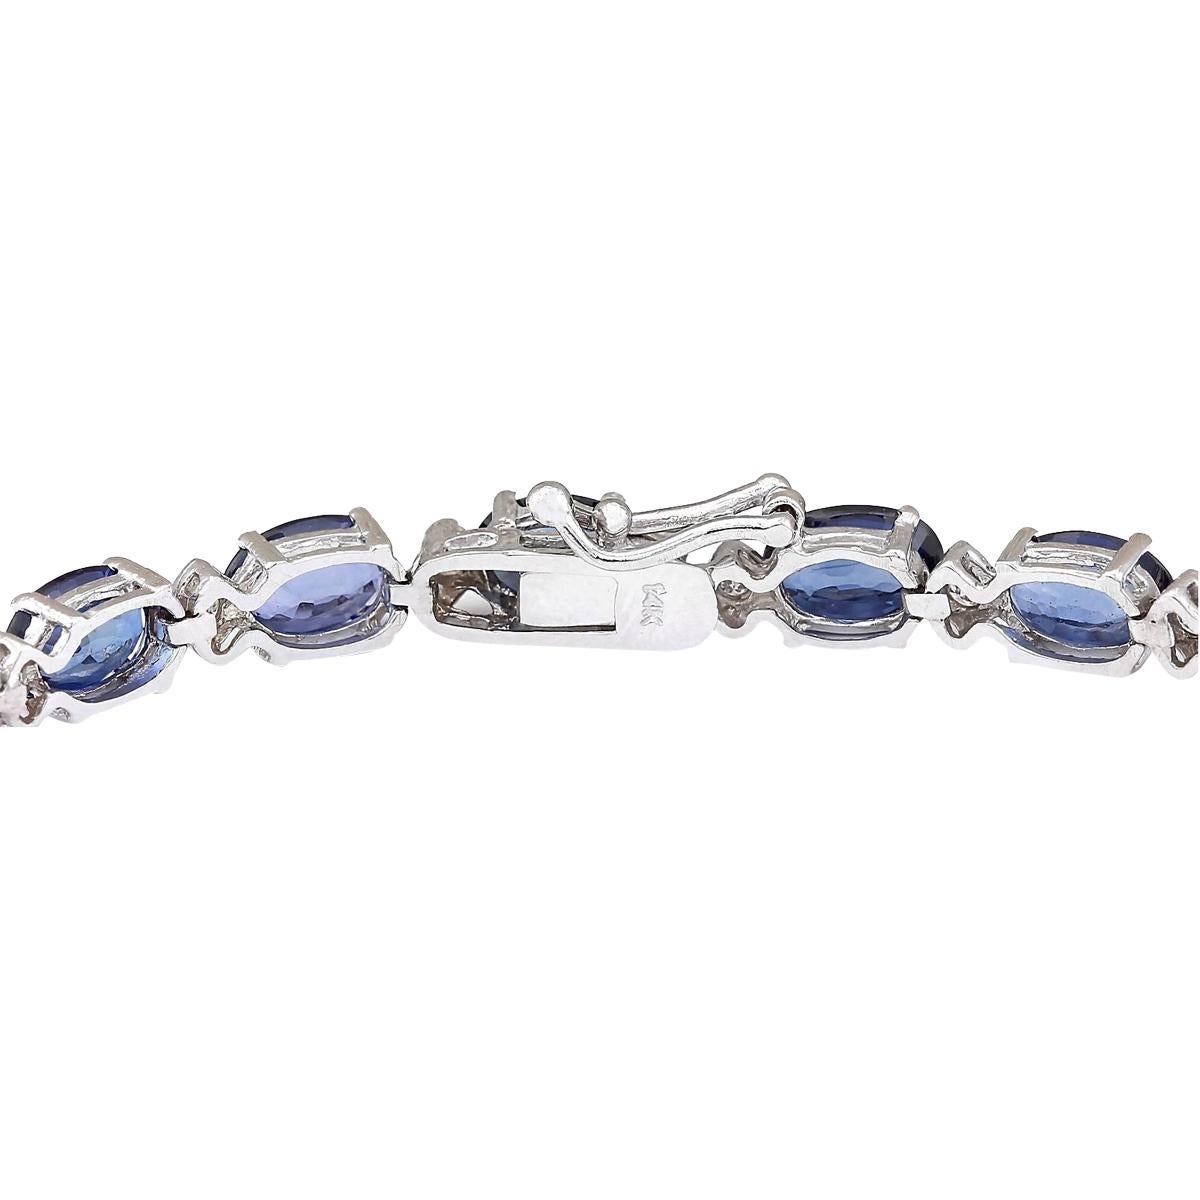 Introducing our exquisite 14K White Gold Diamond Bracelet, featuring a stunning 16.20 Carat Sapphire elegantly set alongside 0.76 Carat Diamonds. Crafted with meticulous attention to detail, this bracelet is stamped with 14K White Gold and weighs